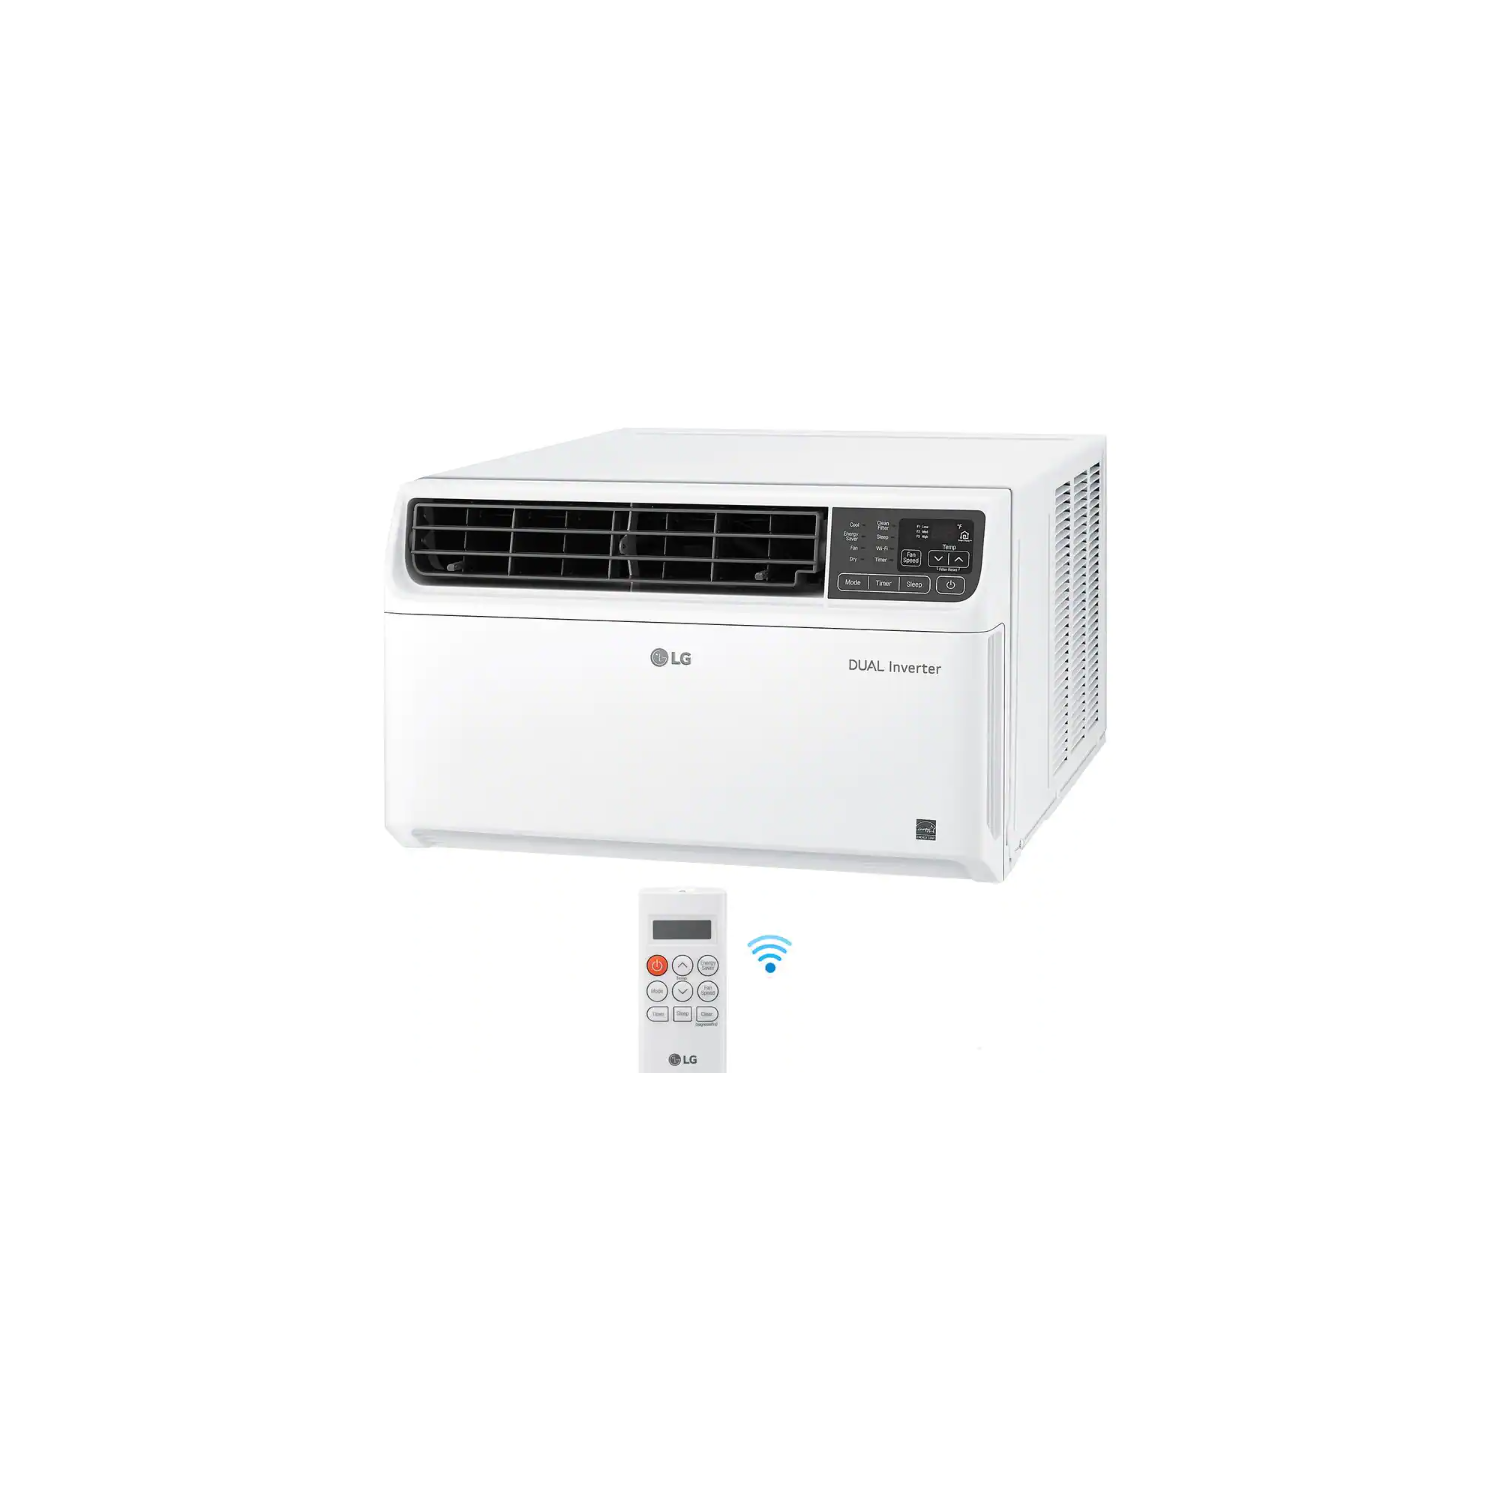 LG 9,500 BTU 115-Volt Dual Inverter Smart Window Air Conditioner with WiFi and Remote in White (LW1019IVSM)